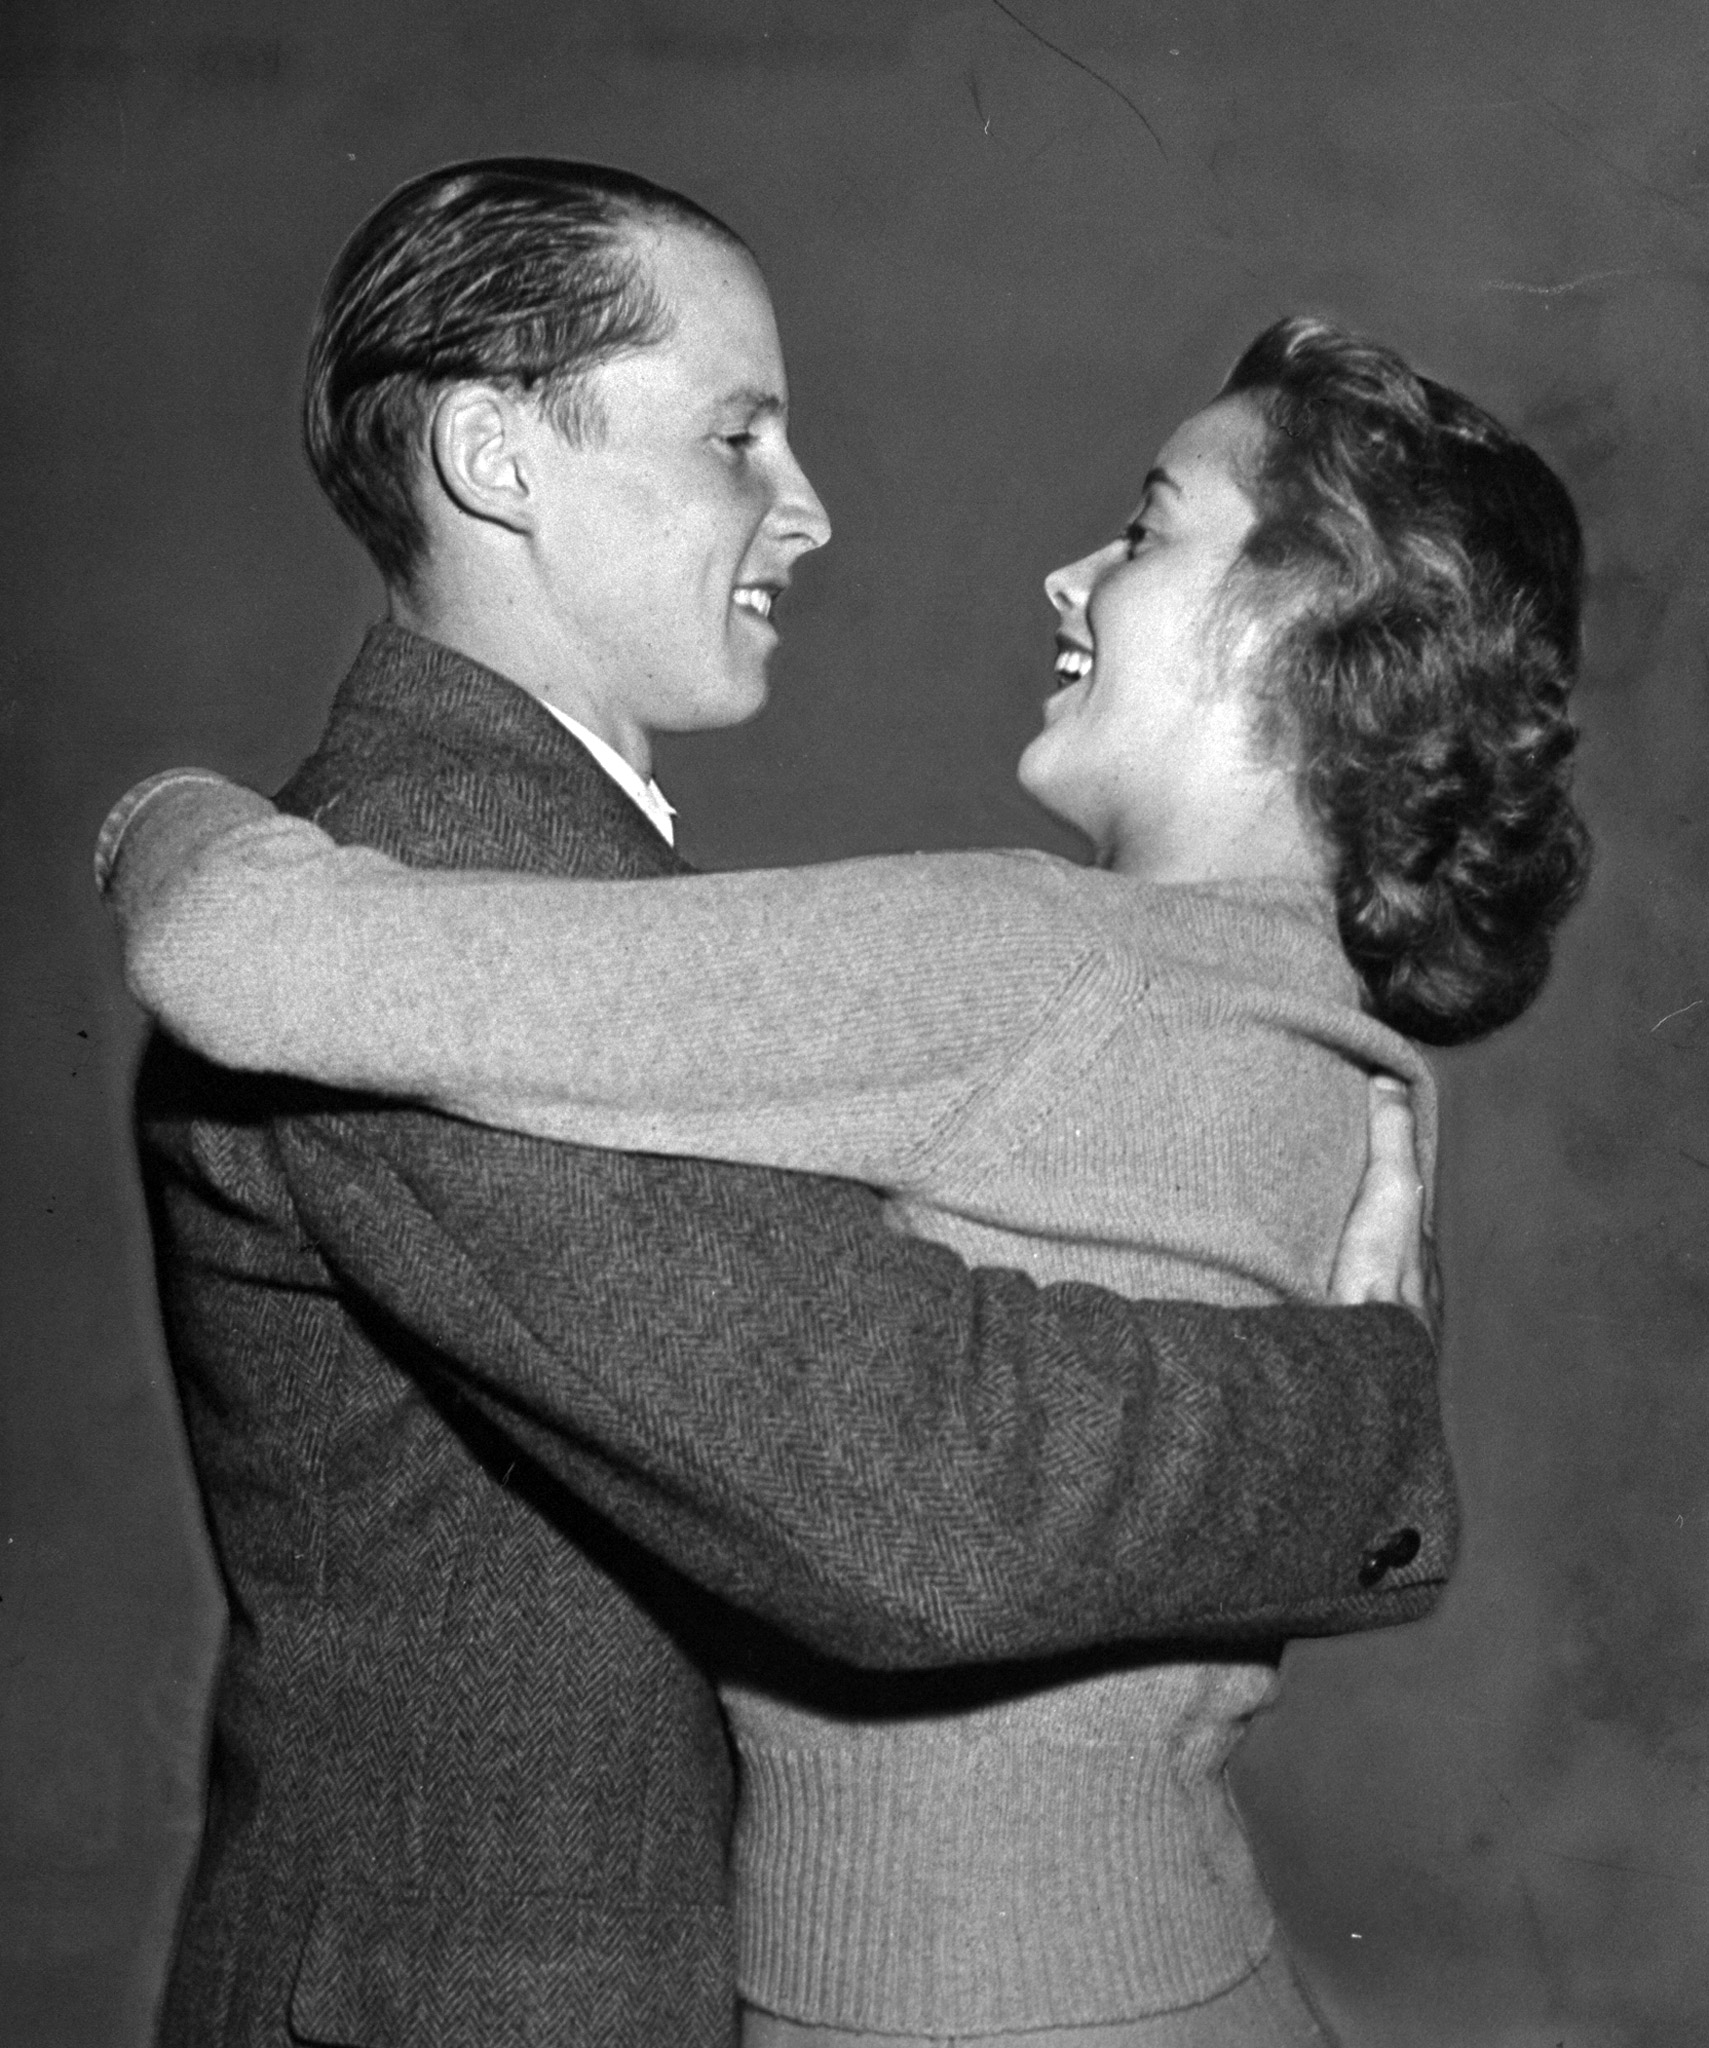 UCLA students Marjorie Henshaw and Johnny Hessel embracing one another, 1939.